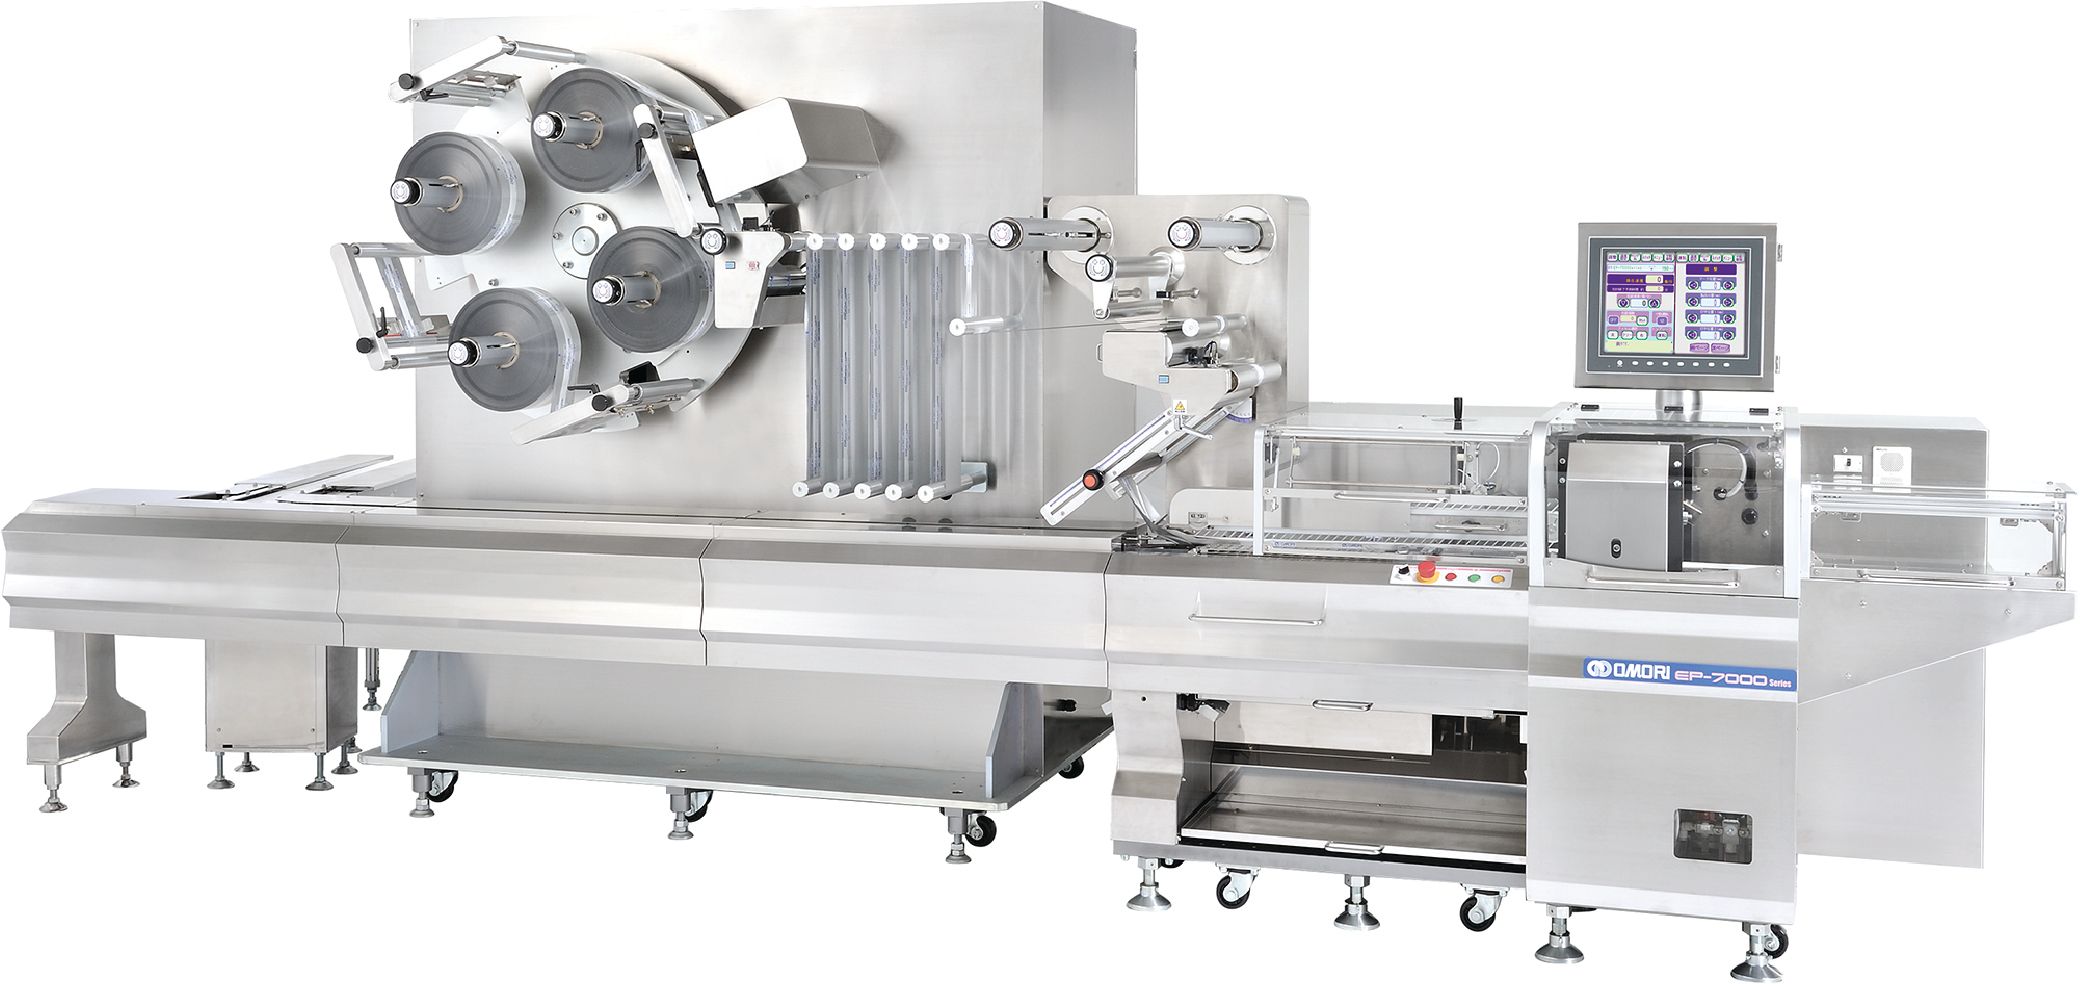 The world's fastest Box Motion Flow Wrapper is ready for the future of the packaging industry